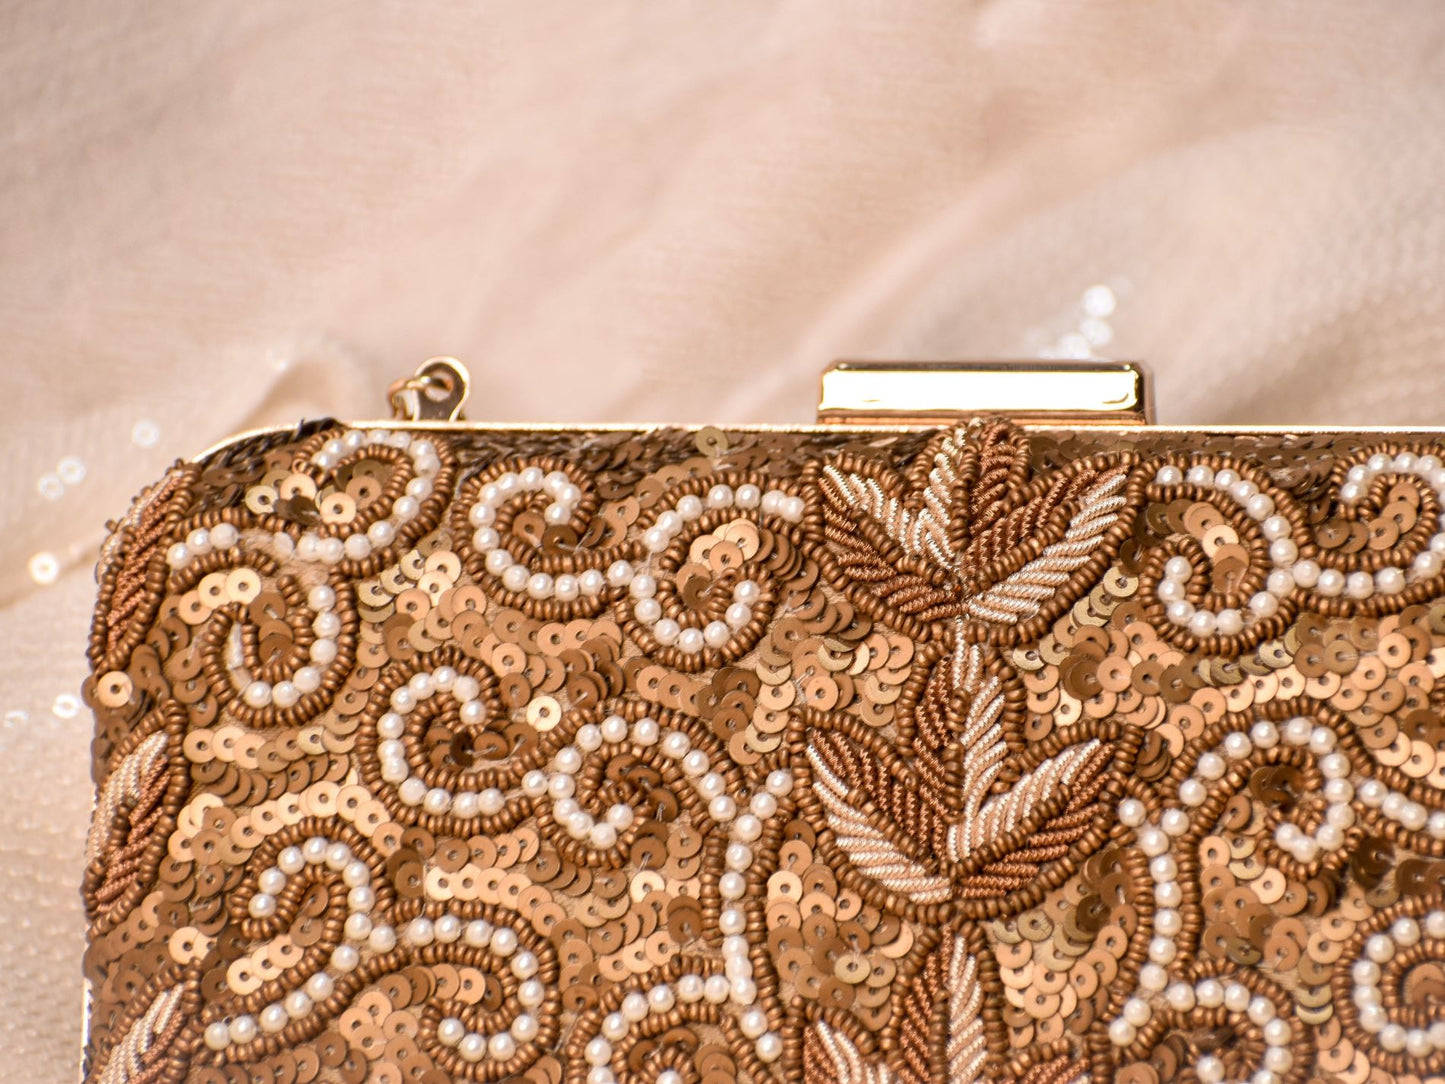 Load image into Gallery viewer, Gold Sequin Clutch
